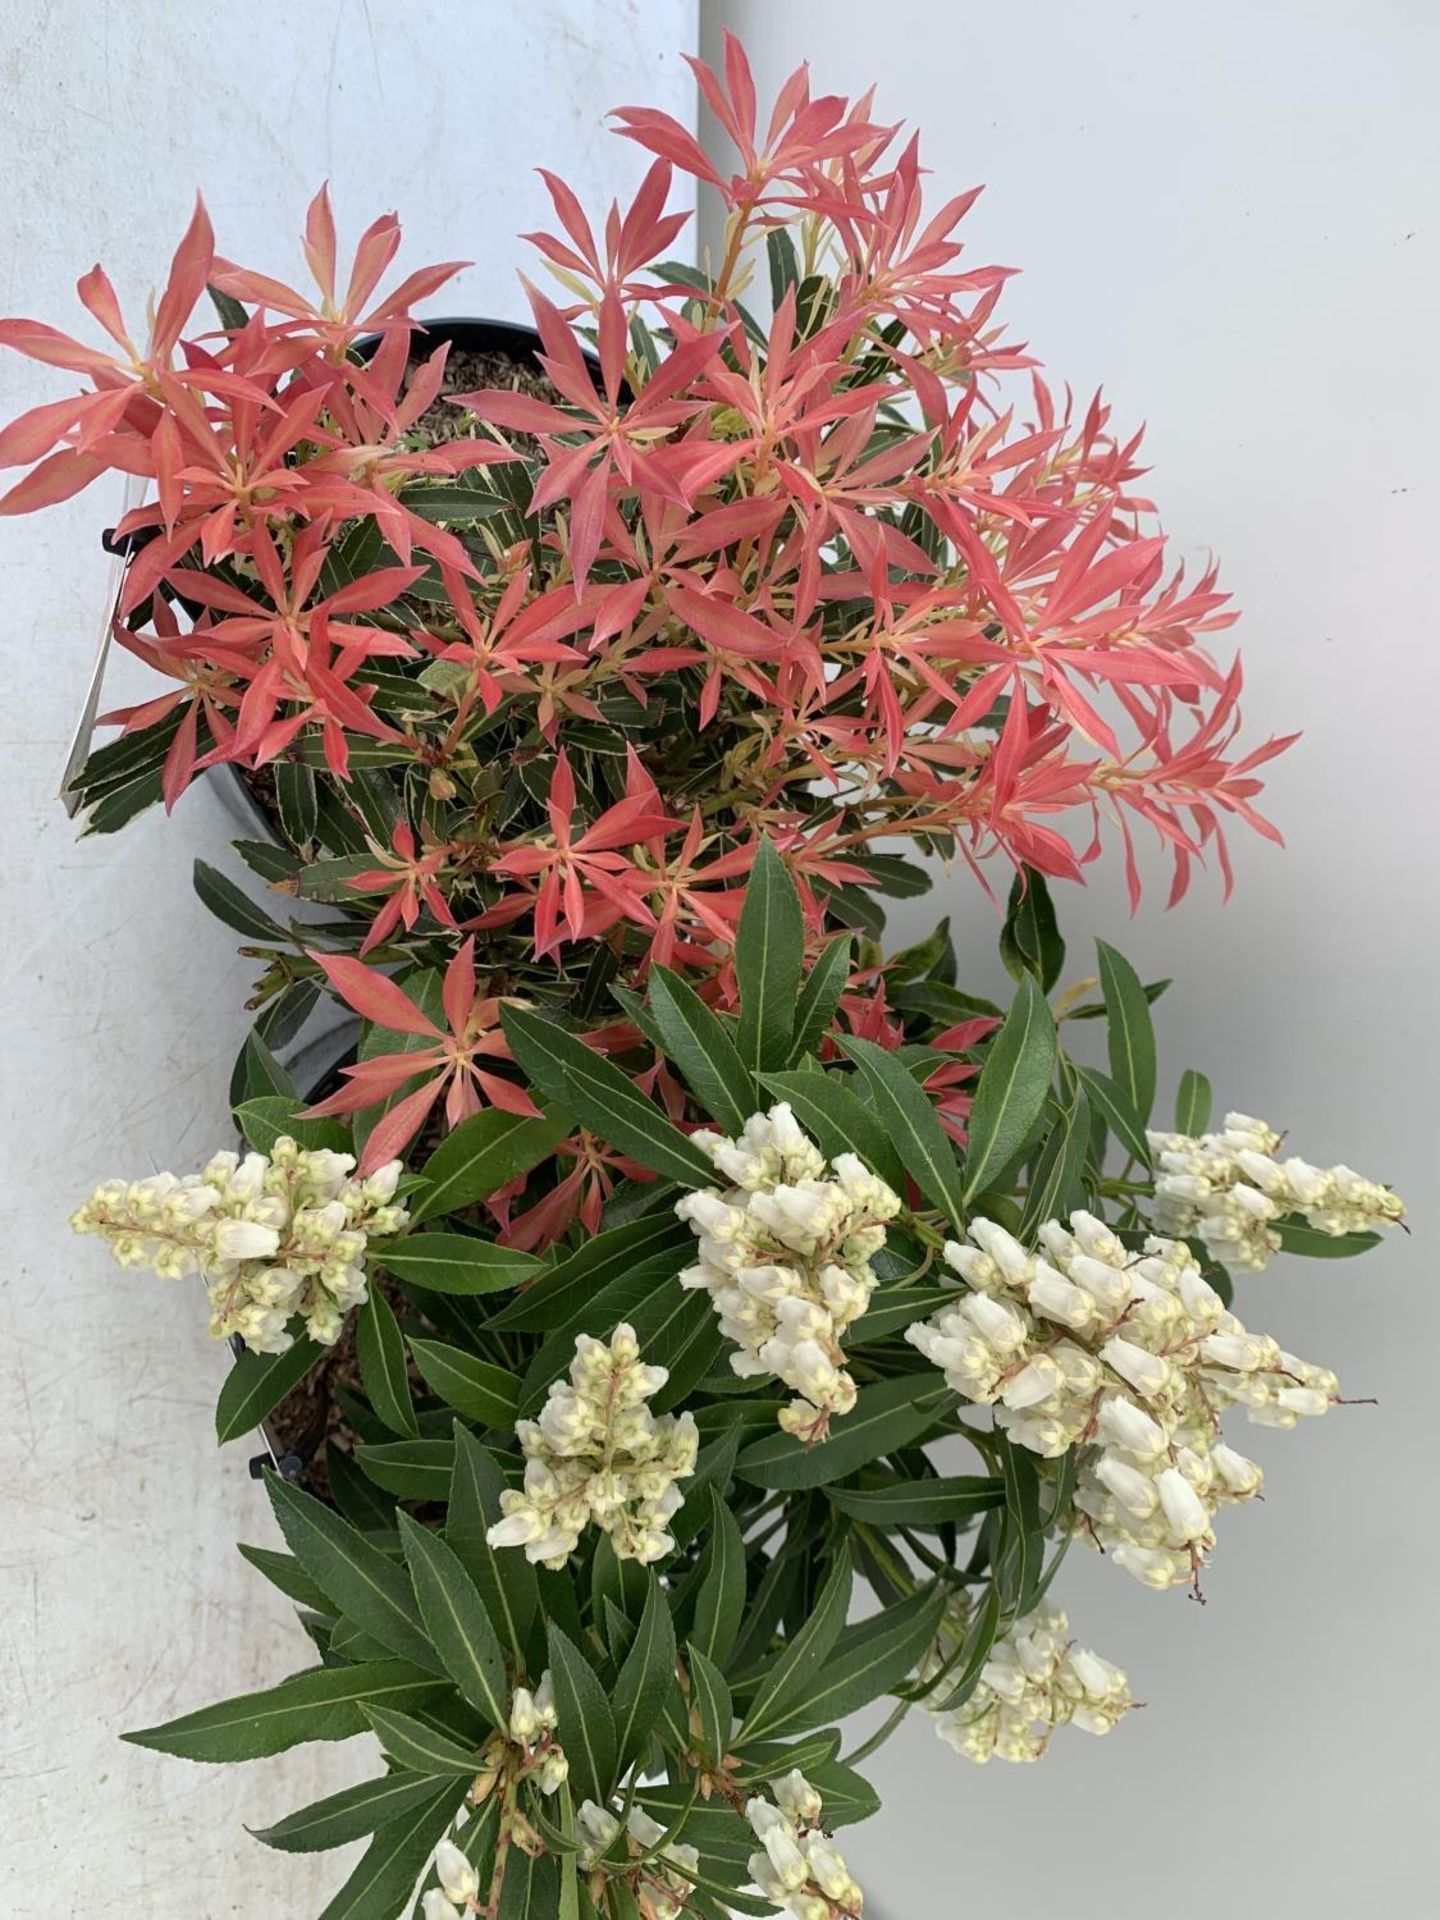 TWO PIERIS JAPONICA FORSET FLAME AND FLAMING SILVER IN 3 LTR POTS 40CM TALL PLUS VAT TO BE SOLD - Image 6 of 12